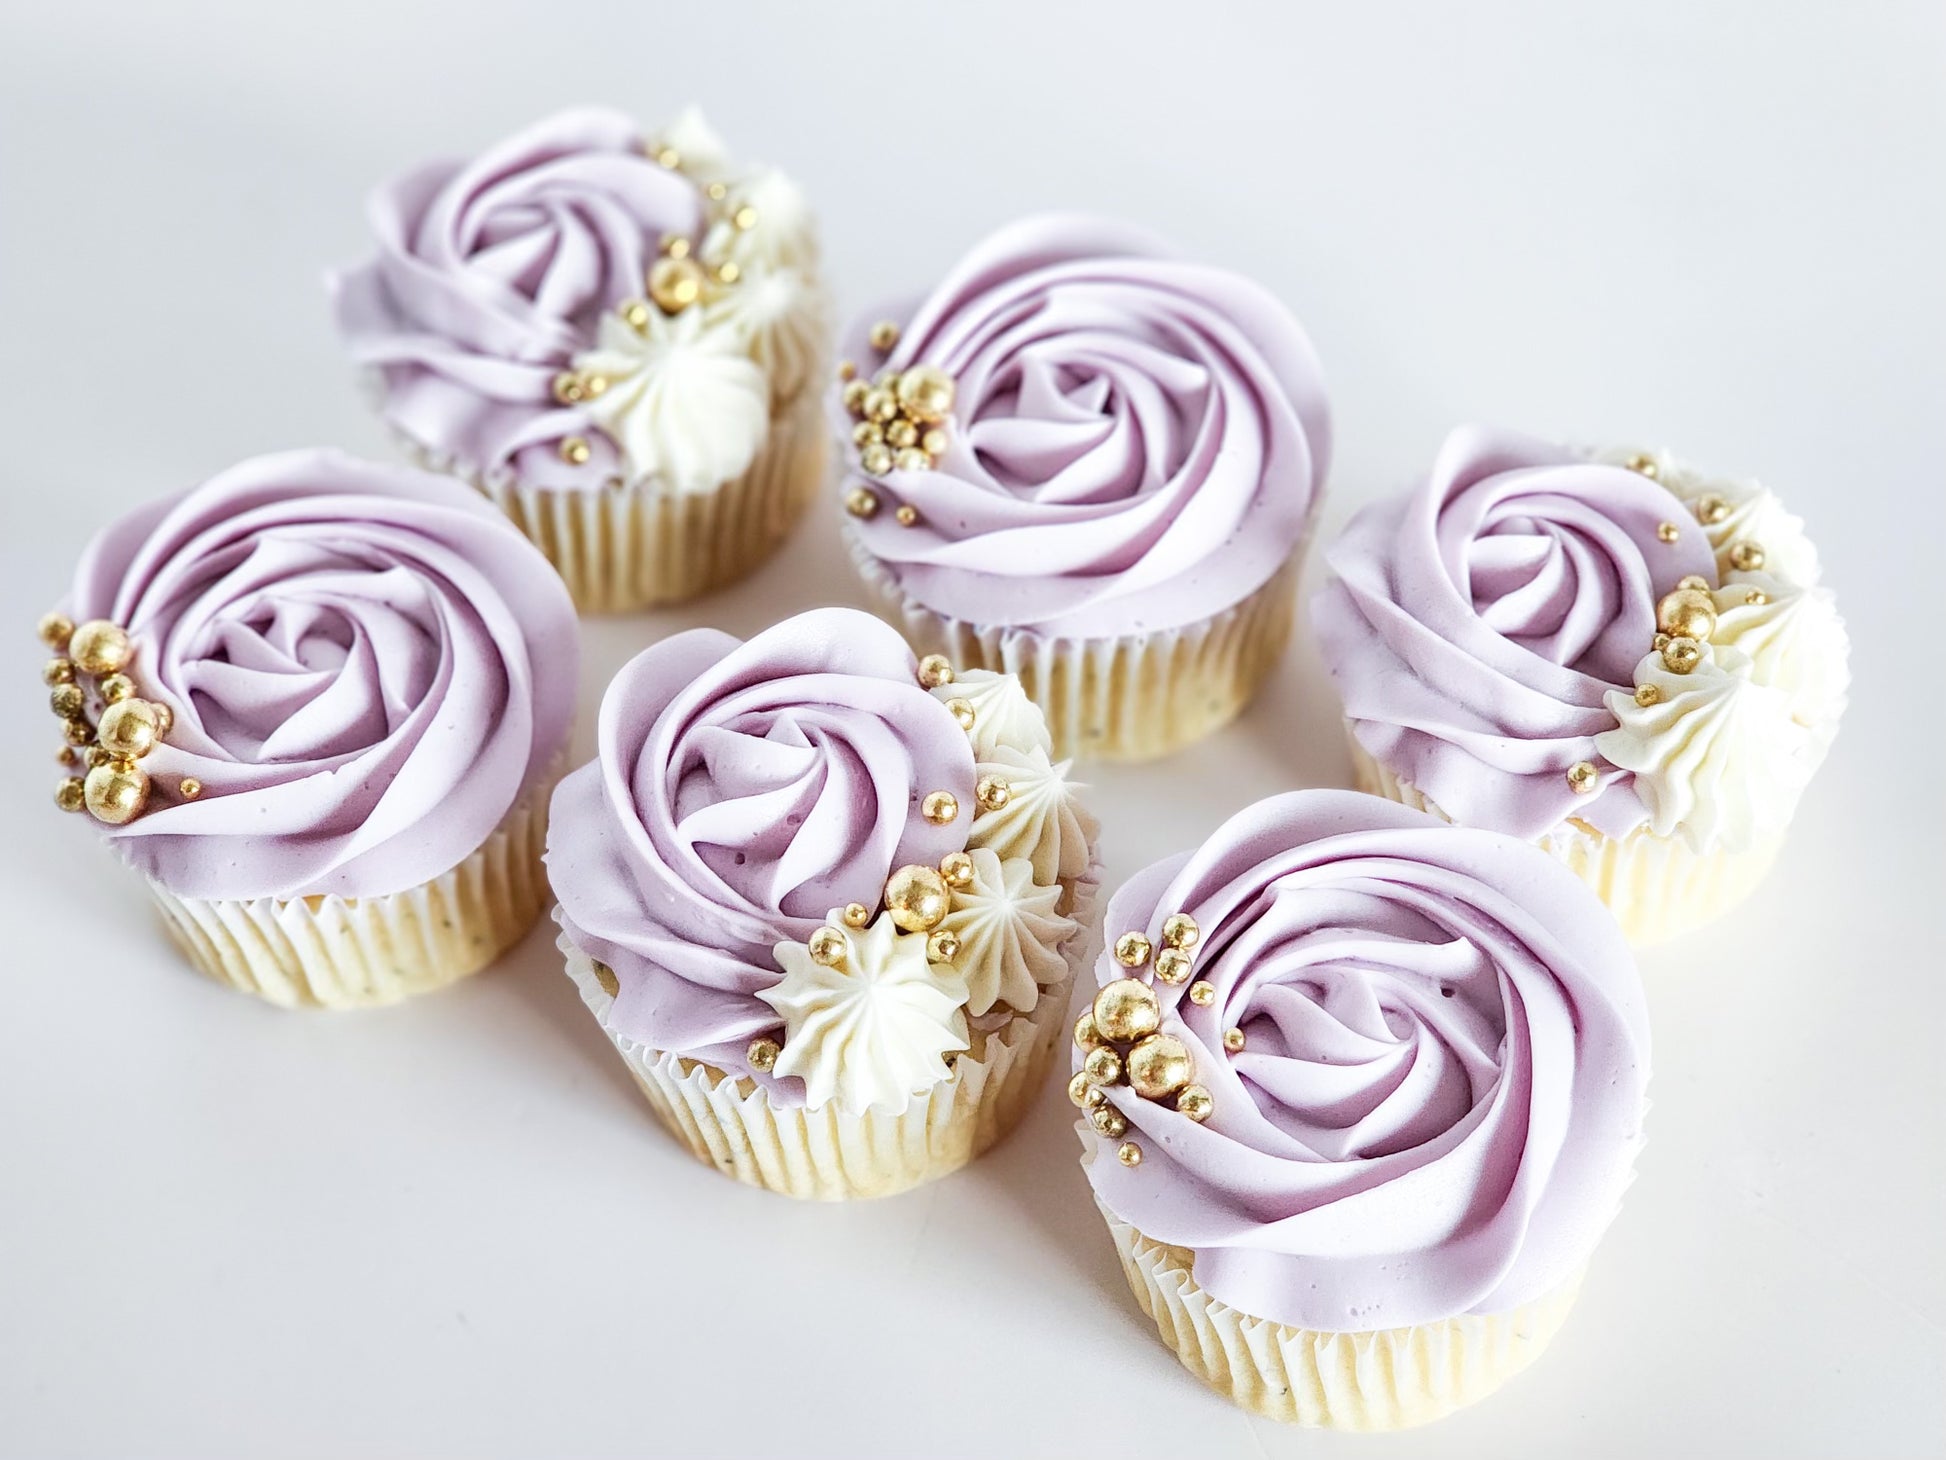 Baking with Lavender: All About Culinary Lavender - SugarHero